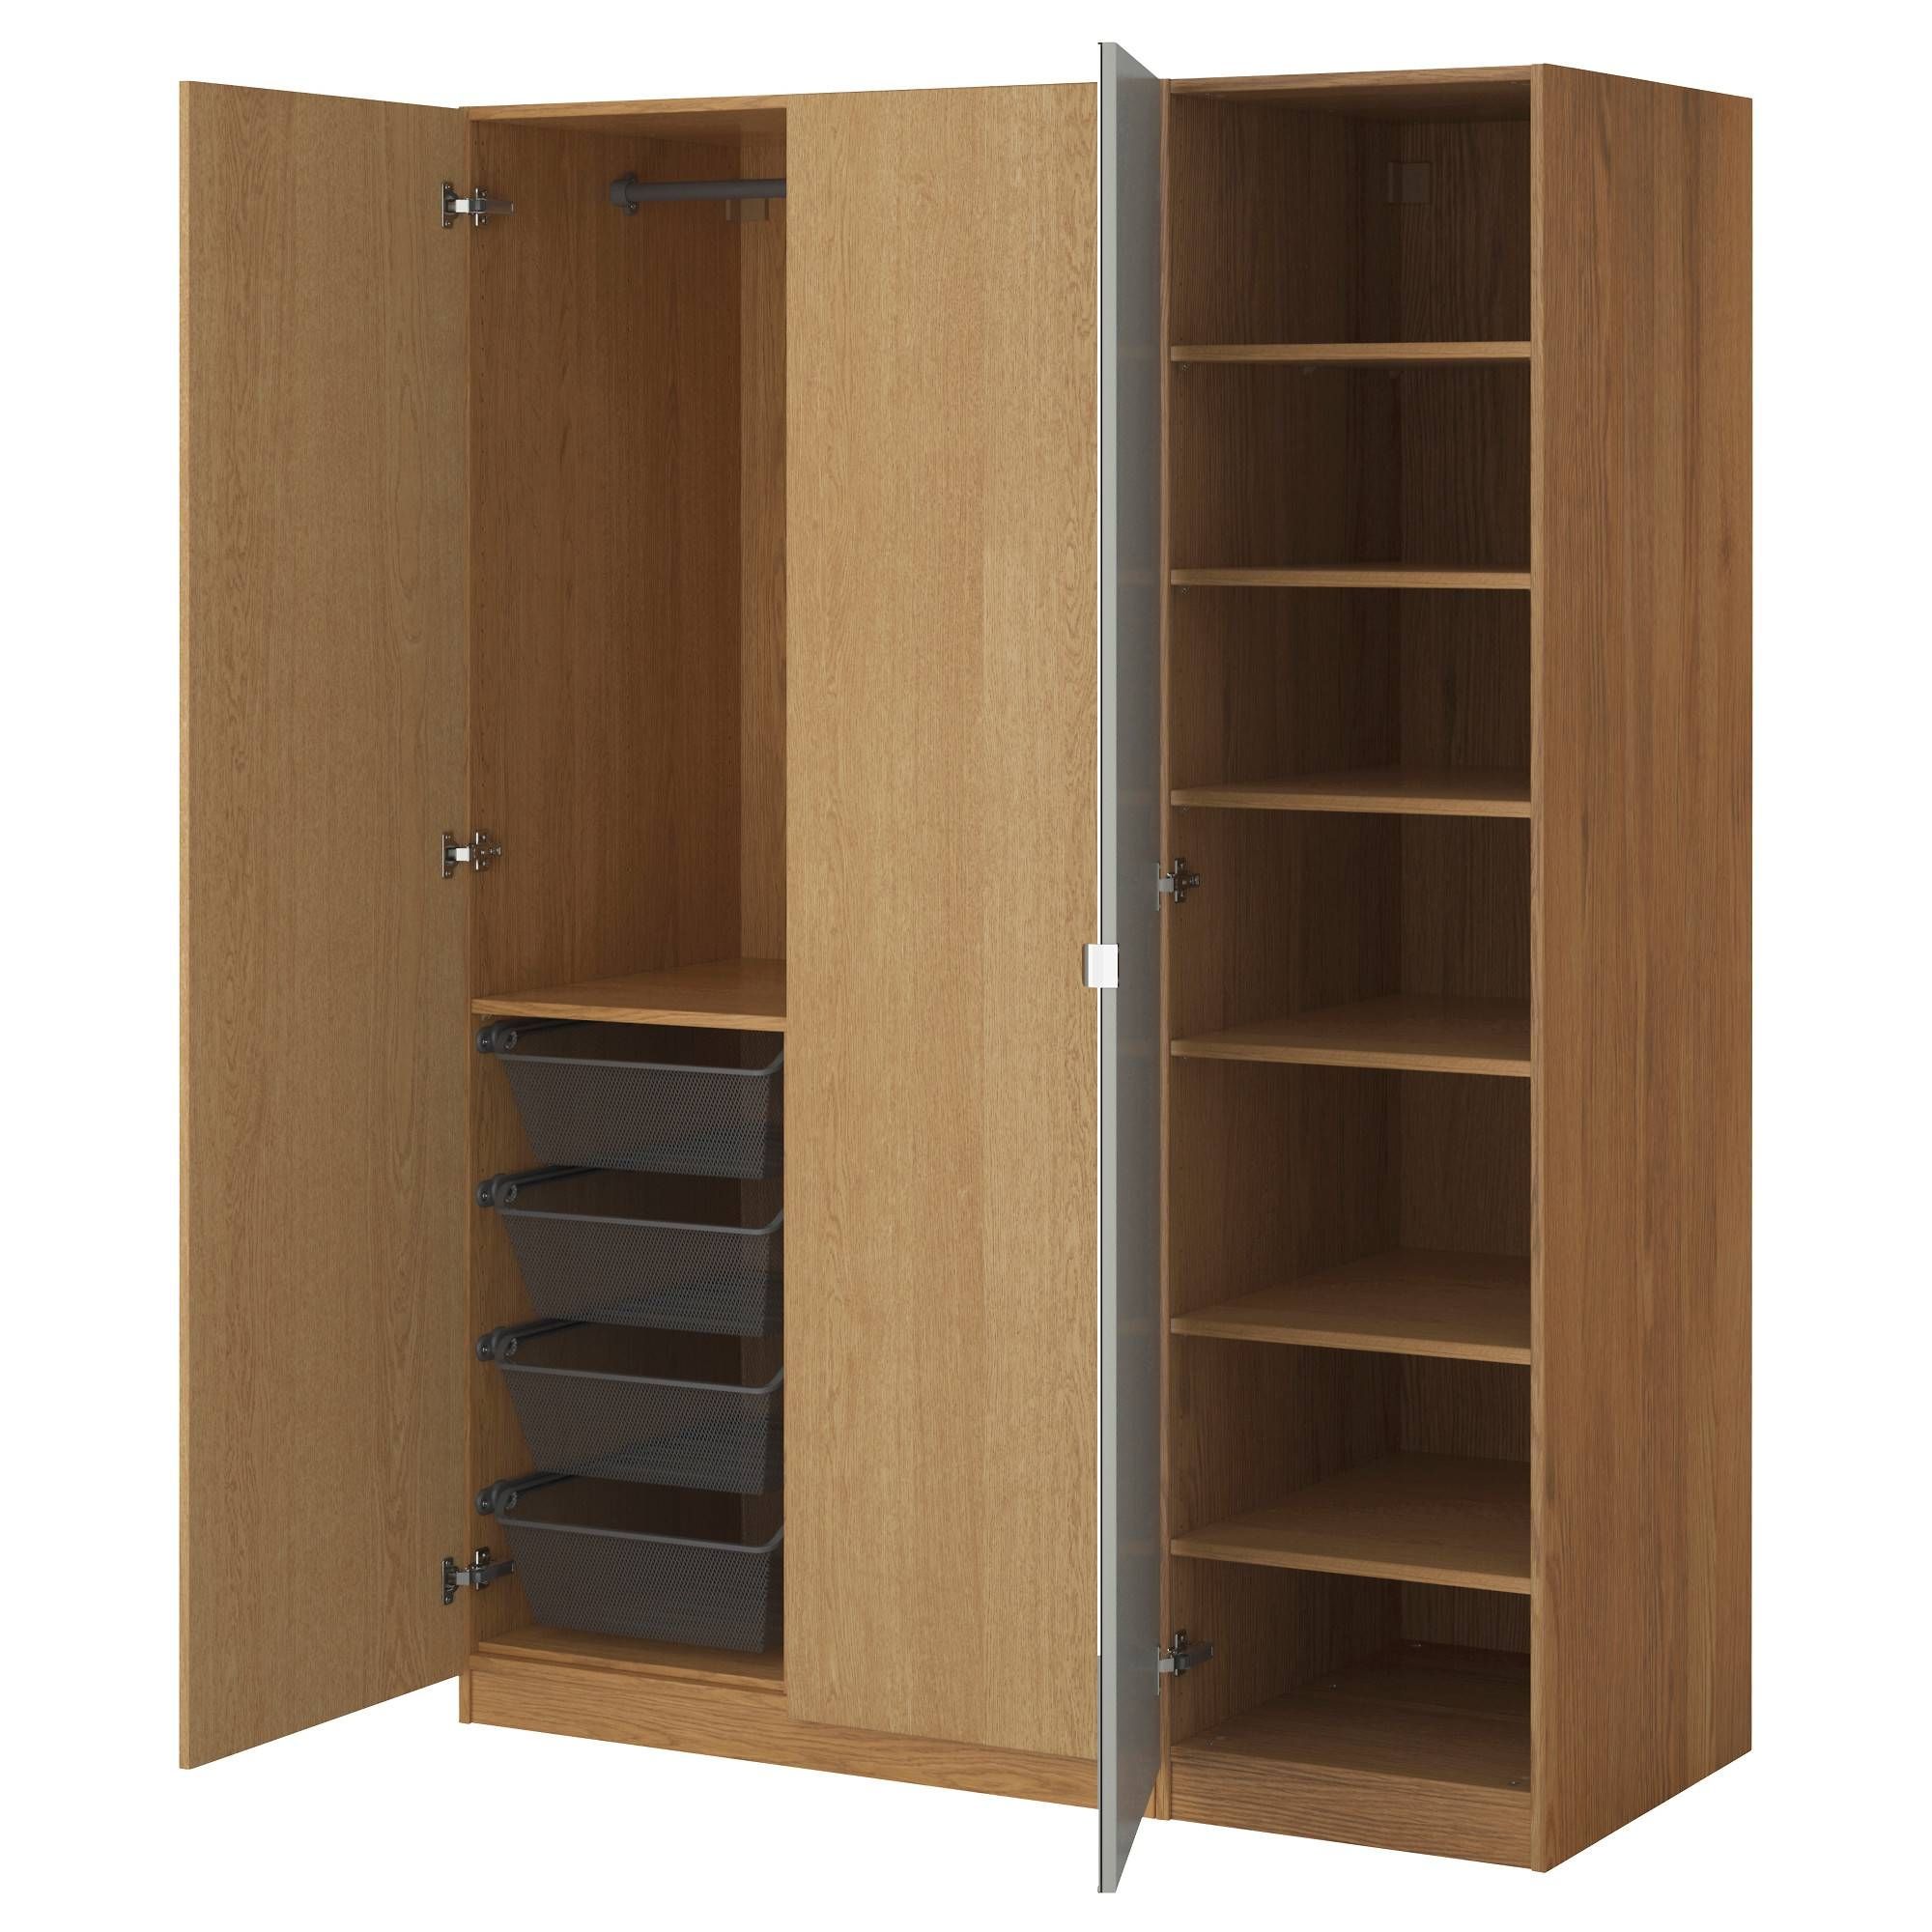 Wardrobes | Ikea Within Small Wardrobes (View 4 of 15)